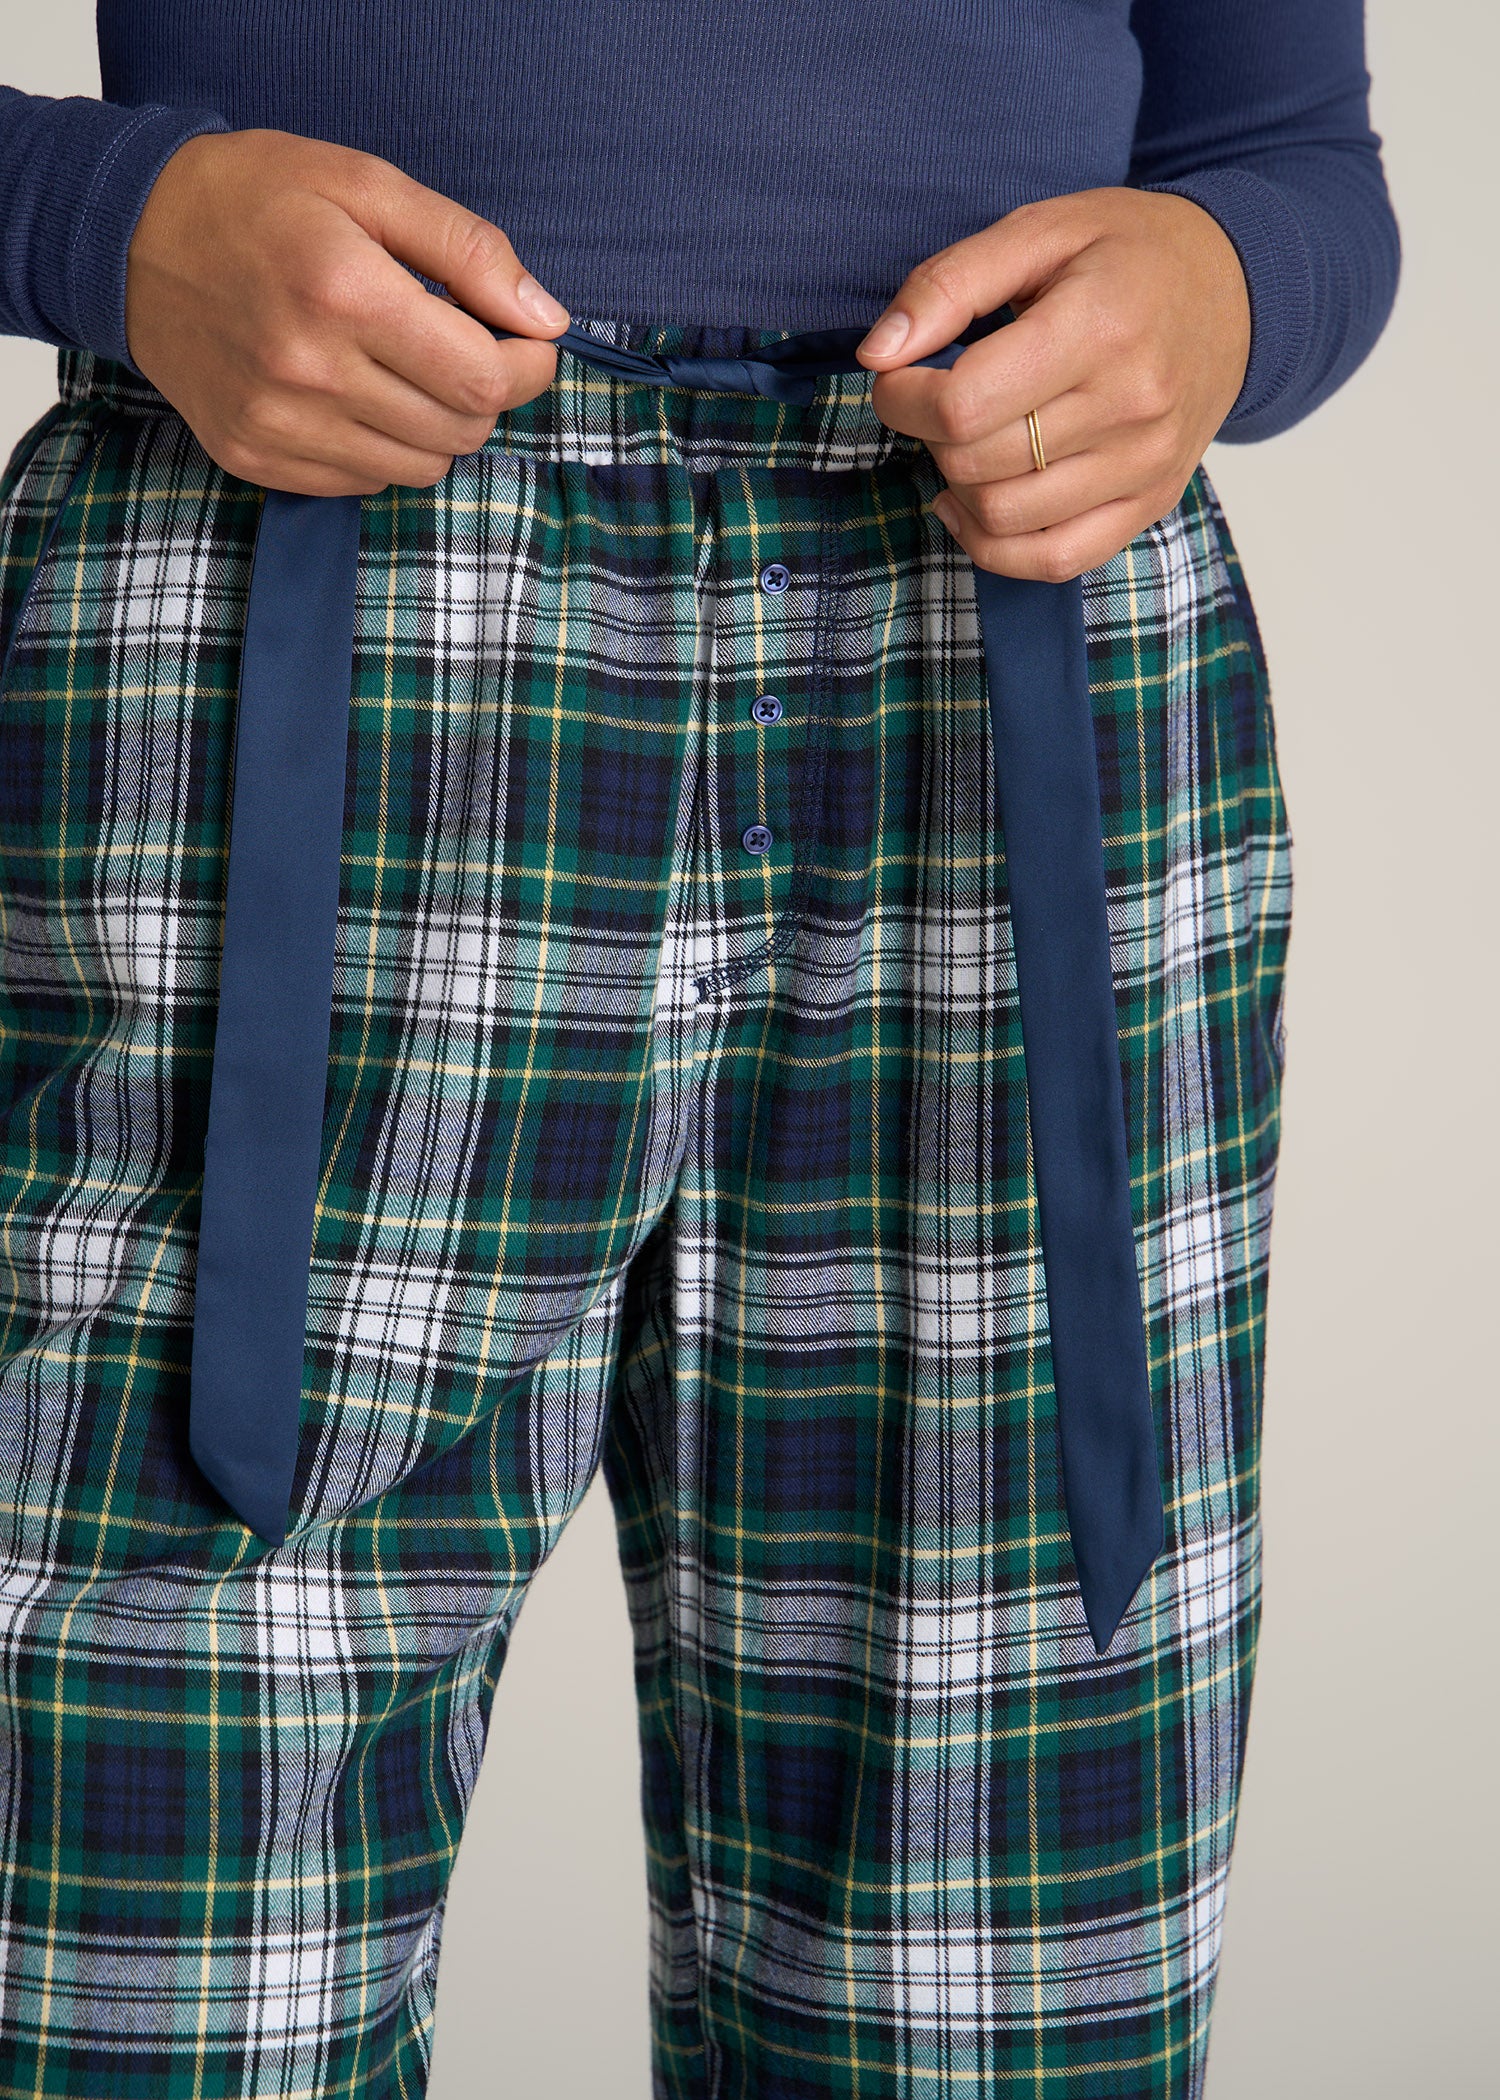 Open-Bottom Flannel Women's Tall Pajama Pants in Green and Navy Tartan